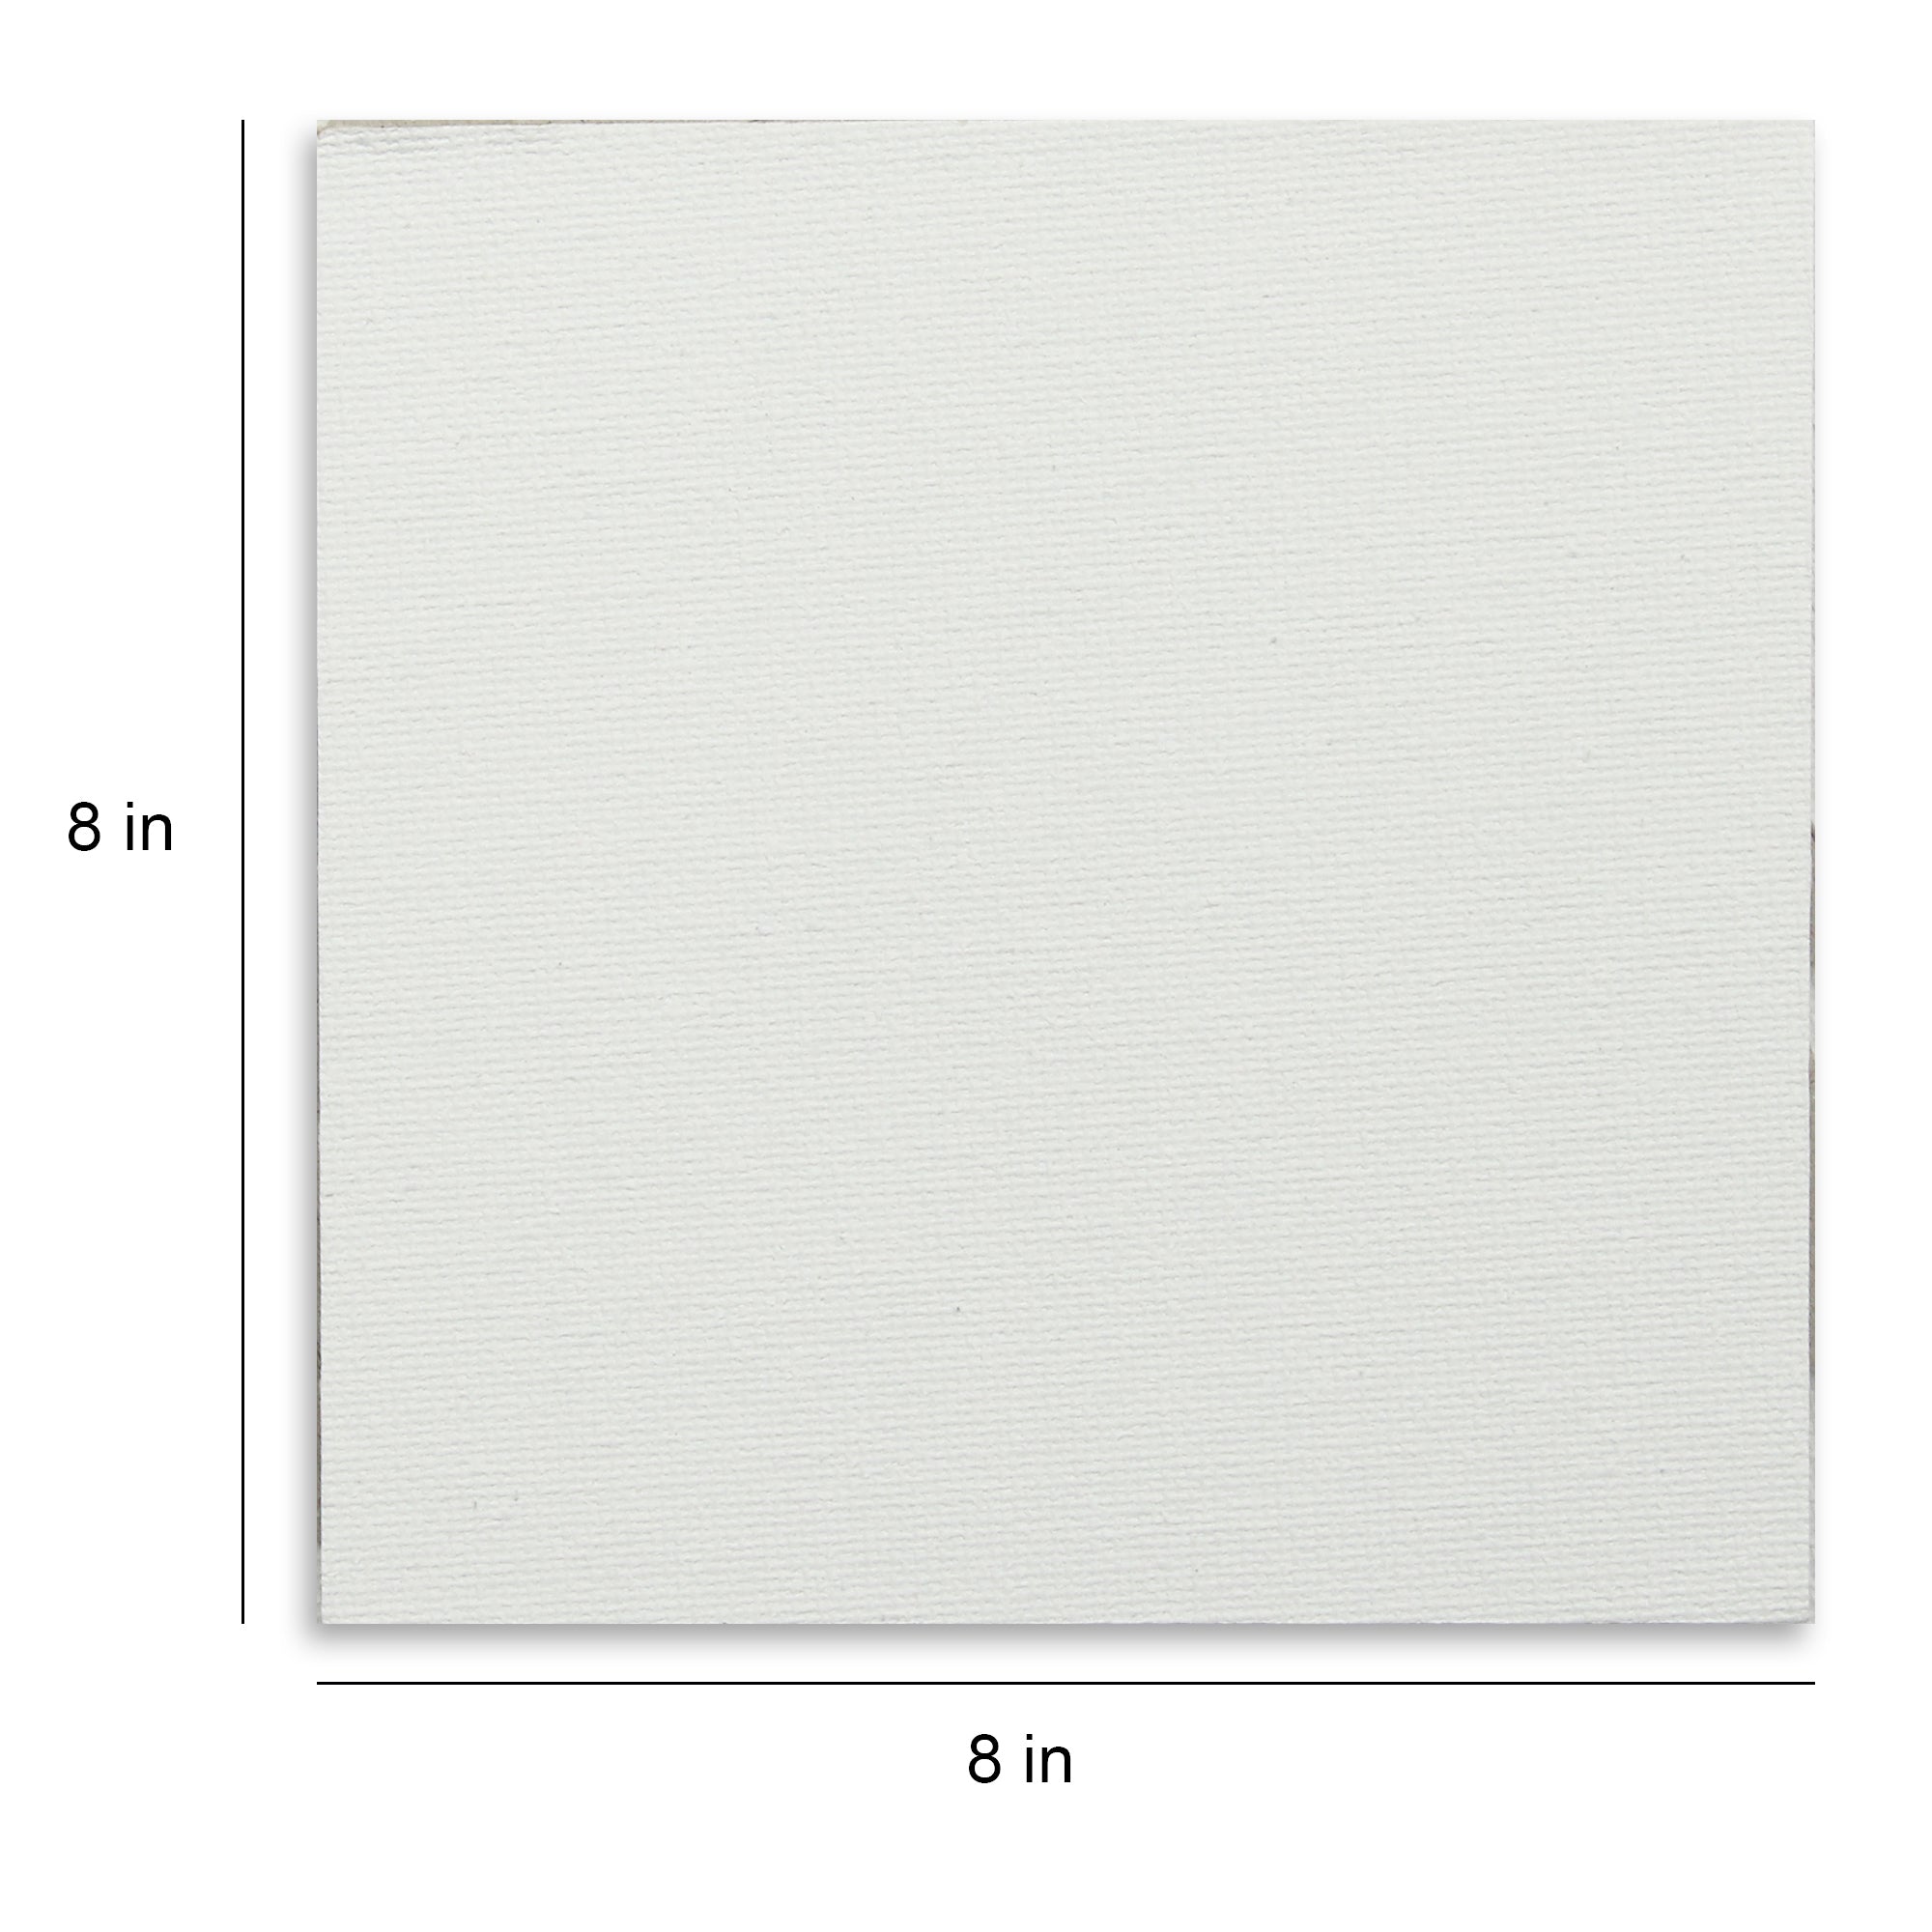 Canvas Board Square 8 X 8Inch 230Gsm 2Mm Thick 4Pc Shrink Lb